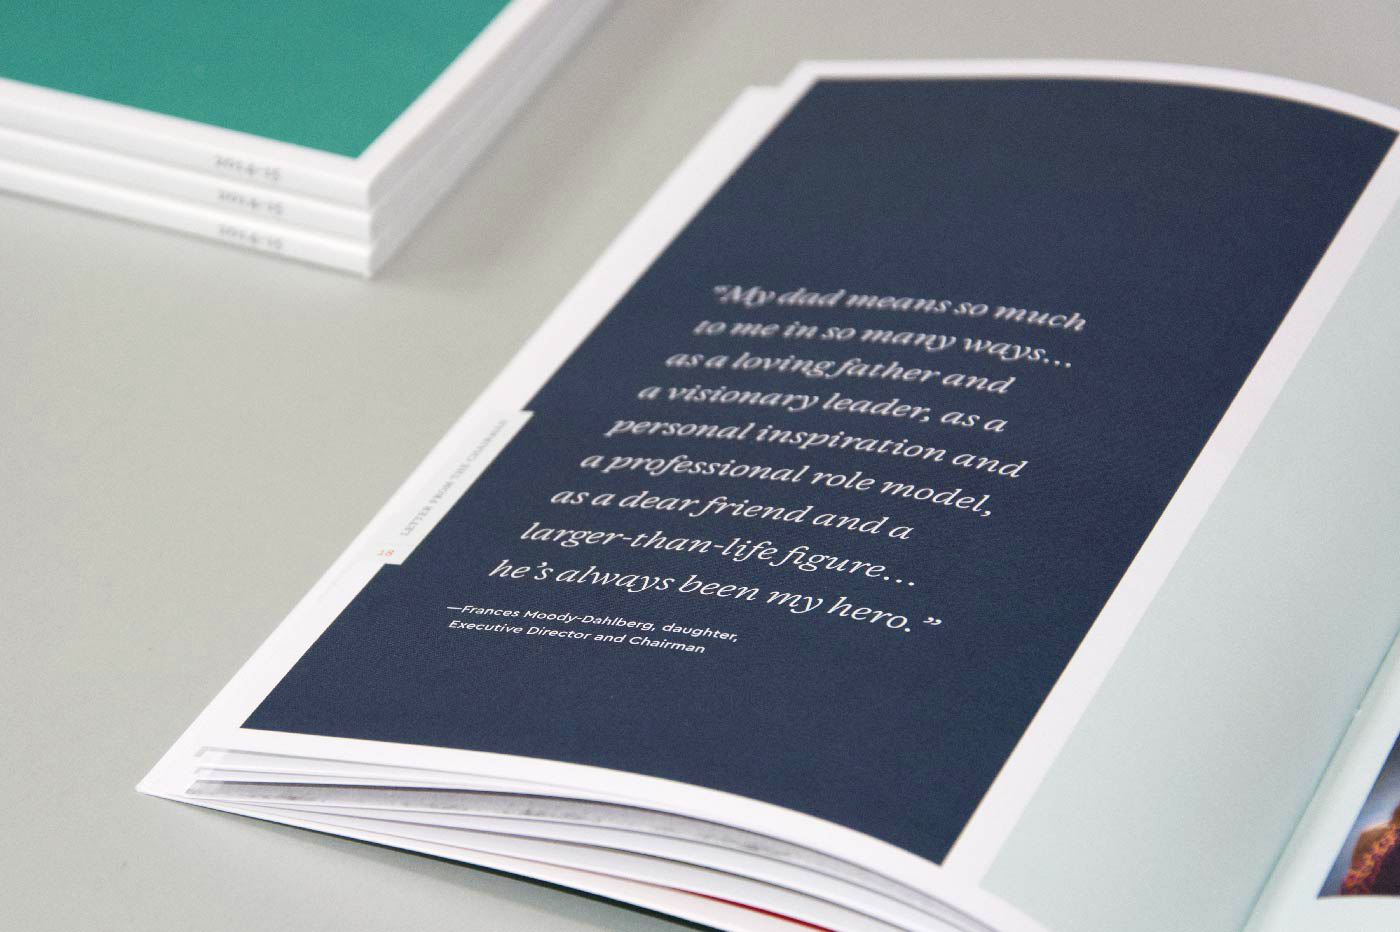 Moody Foundation Annual Report interior quote detail